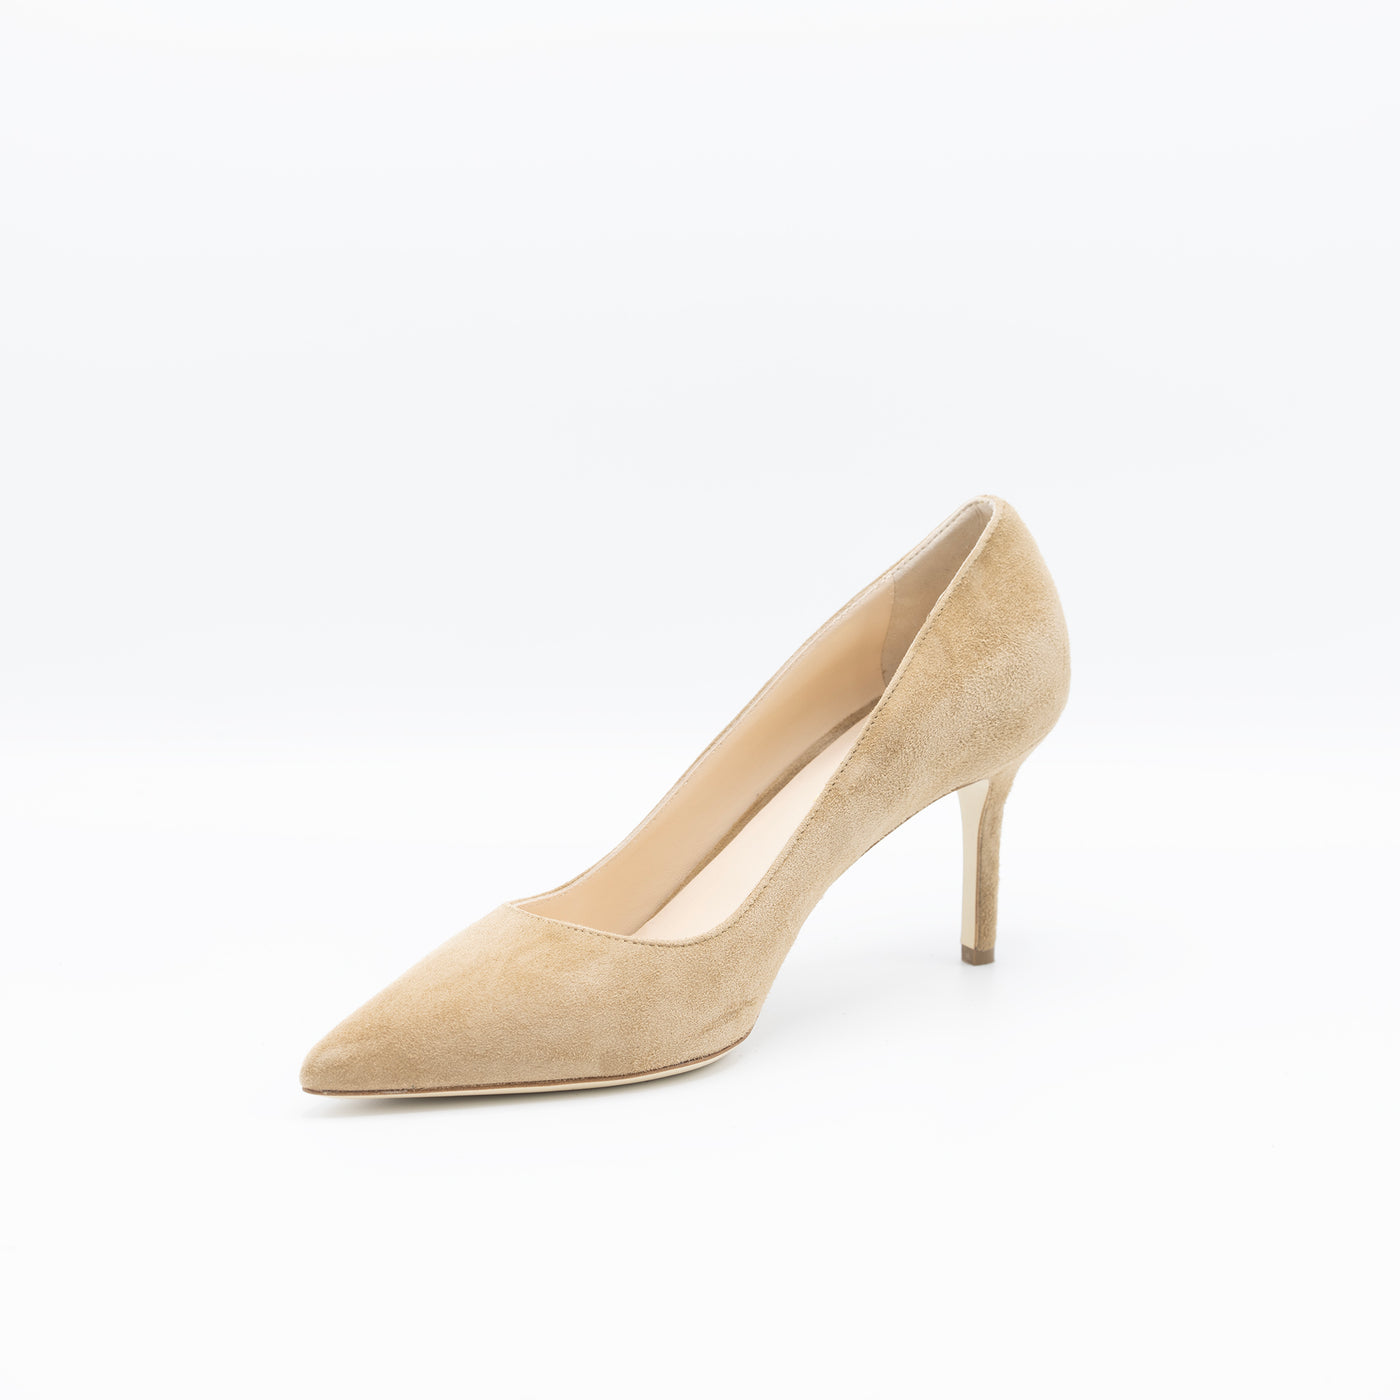 Pointy beige suede leather pumps